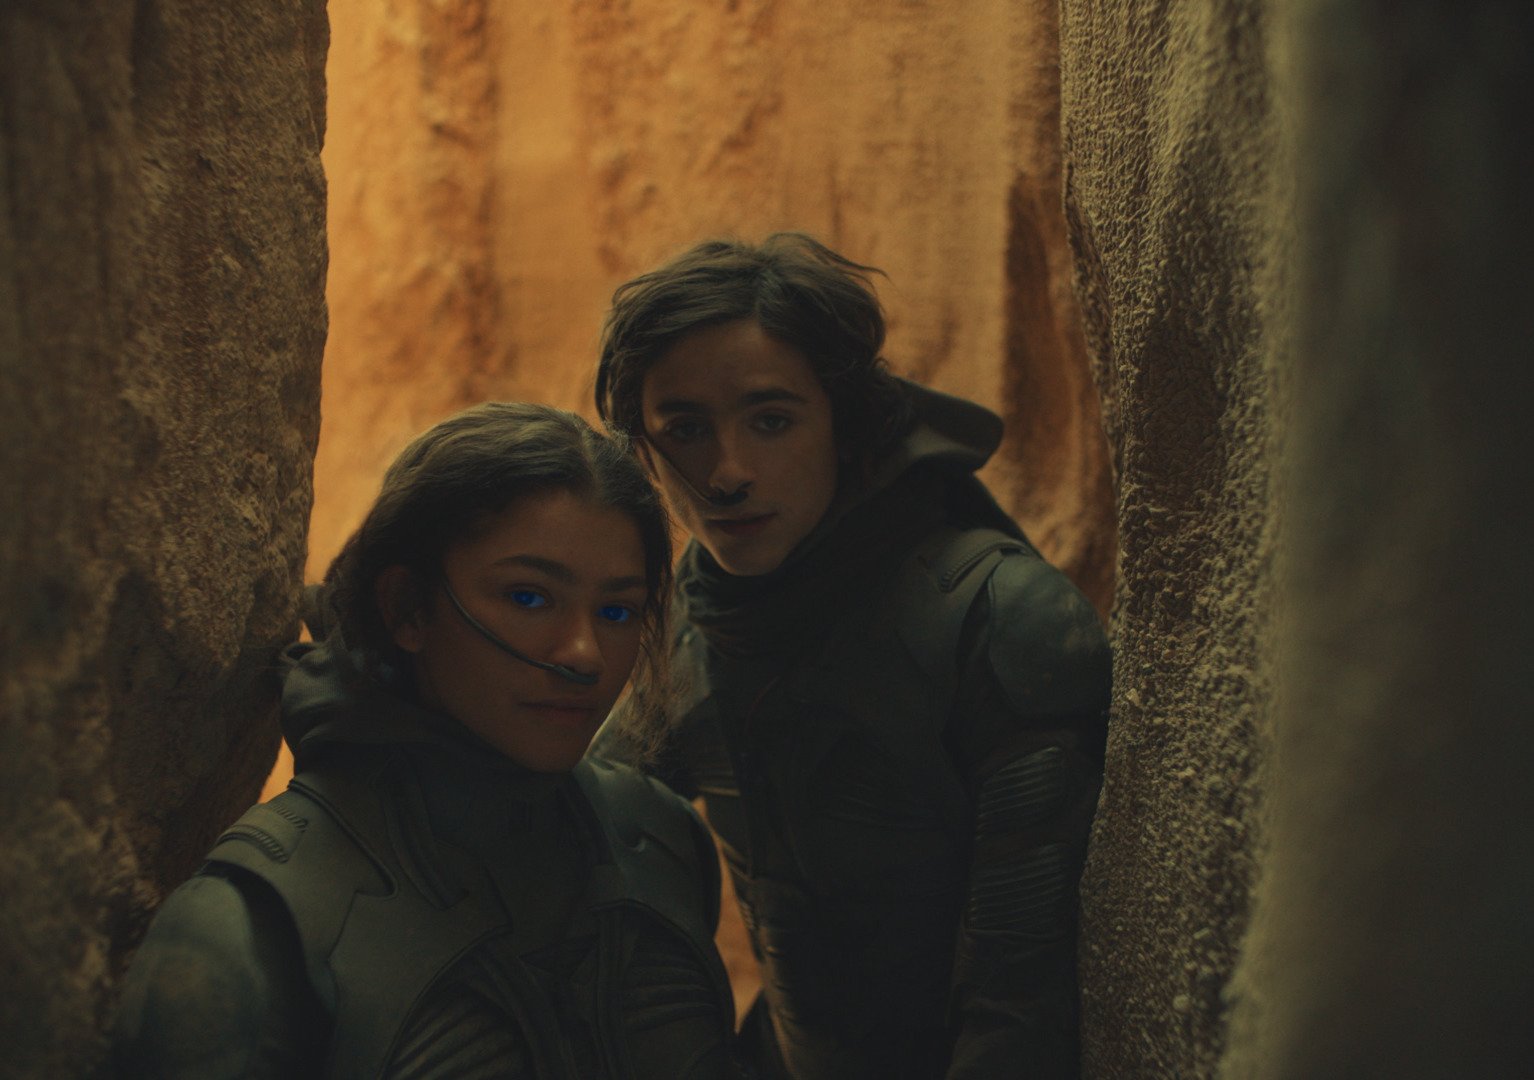 Zendaya and Timothée Chalamet as Chani and Paul Atreides in 'Dune.' They're in what looks like a cavern with walls of sand.